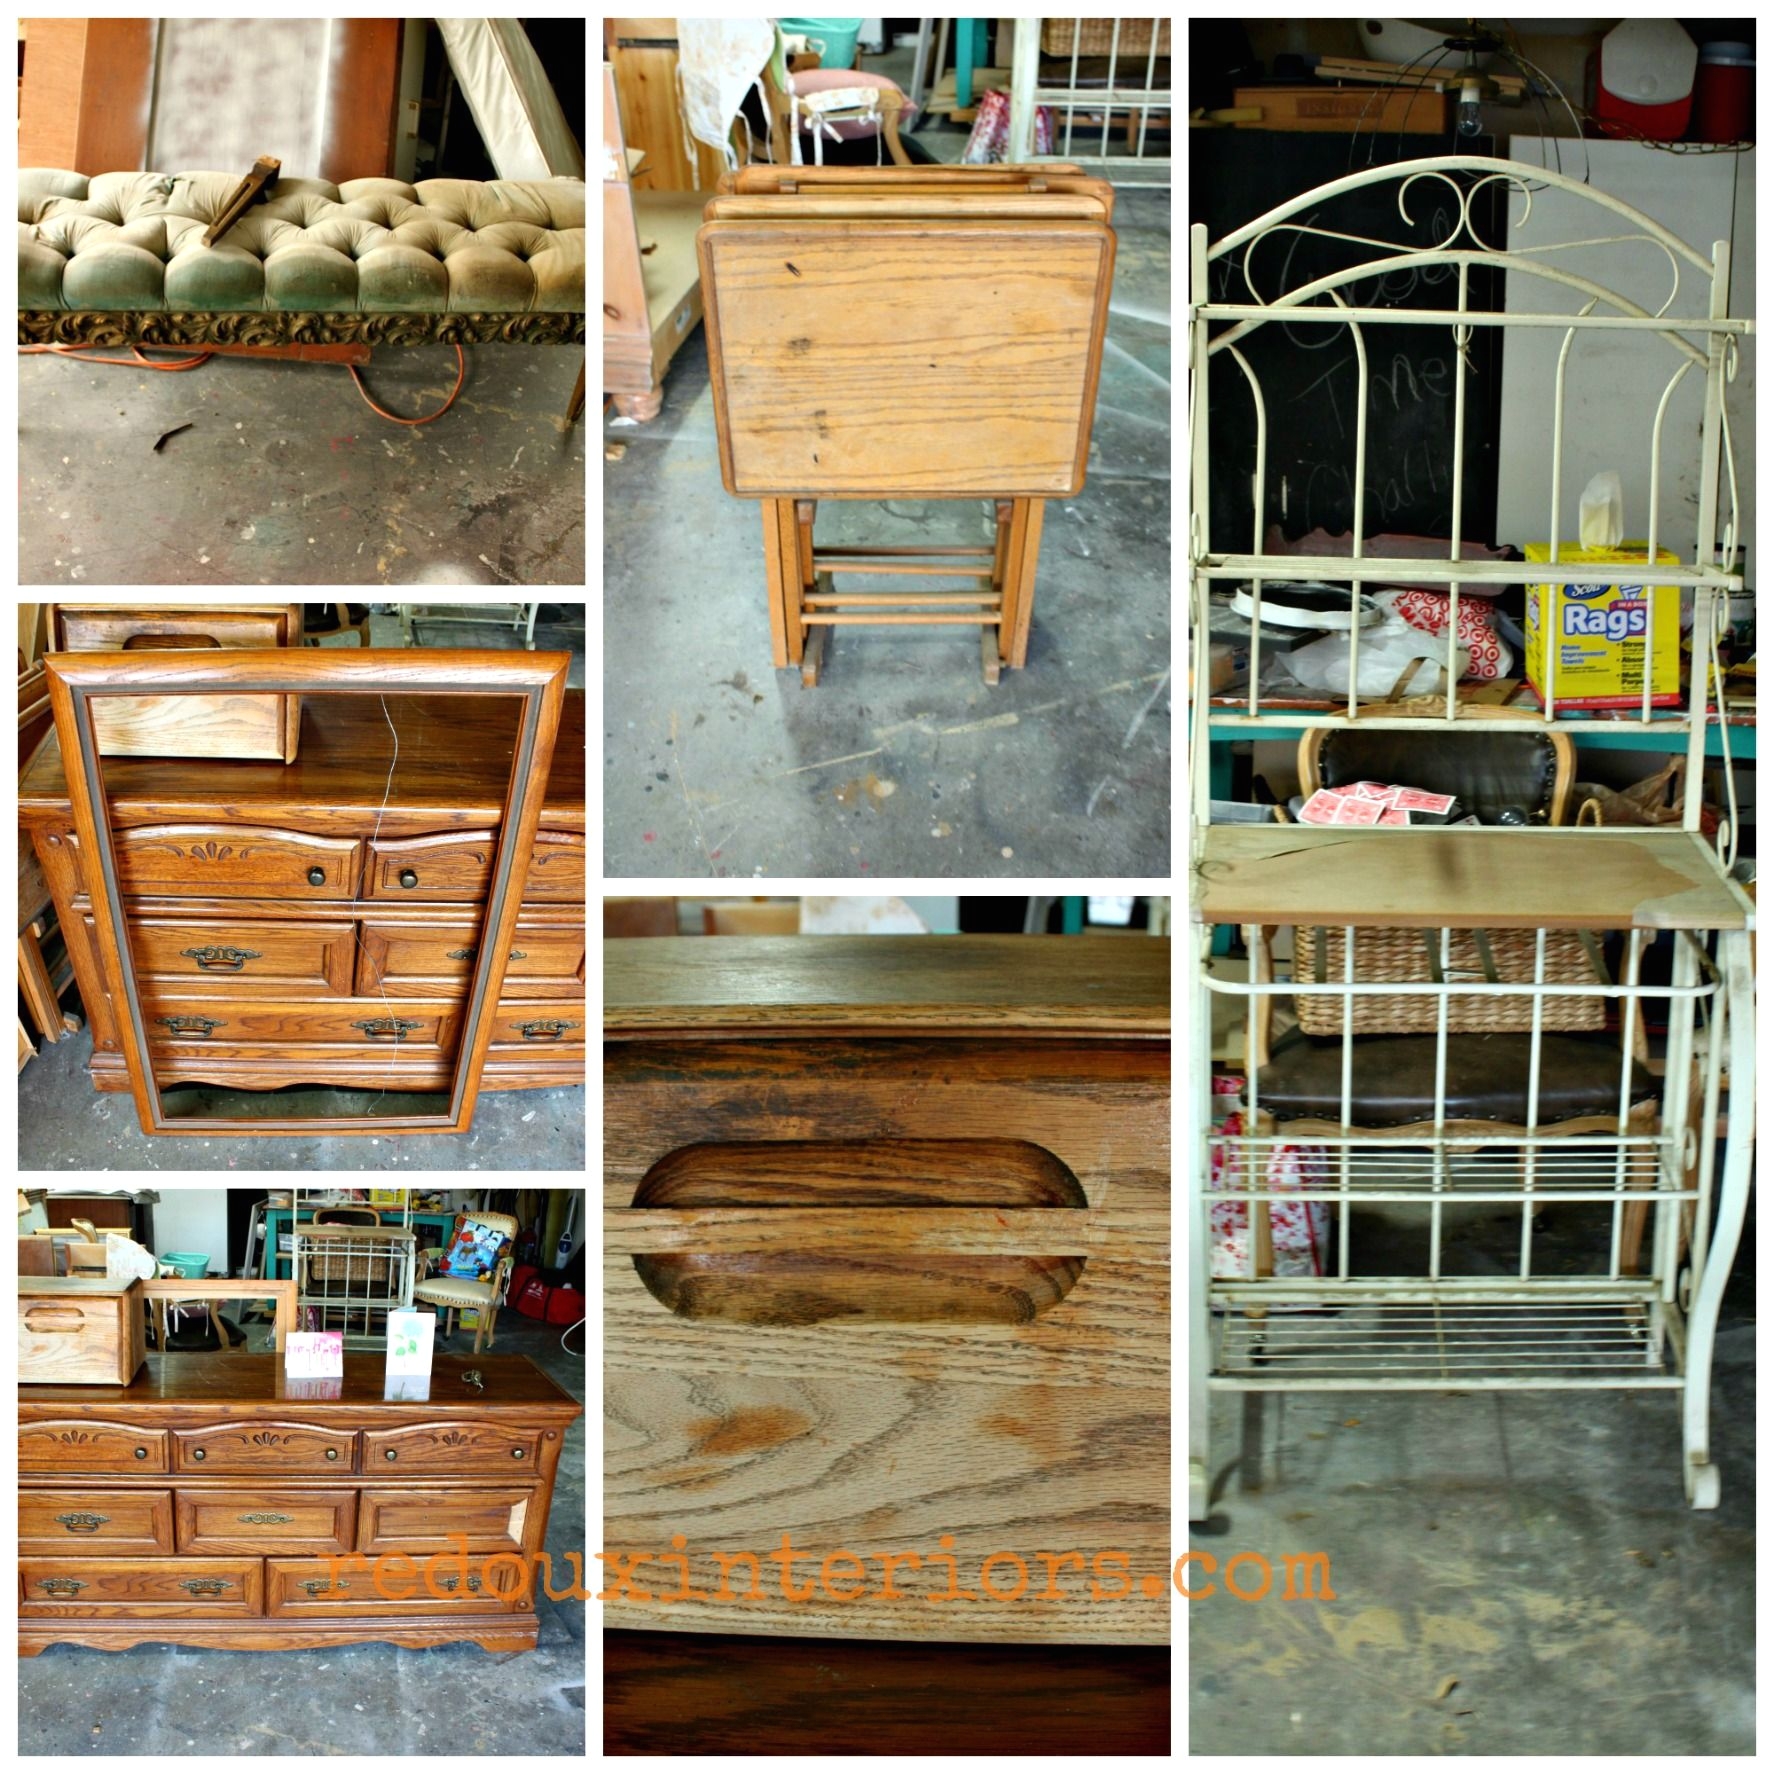 Target Bakers Rack Furniture Collage Of Dressers Bakers Rack Jpg 1 774a 1 774 Pixels A Place for